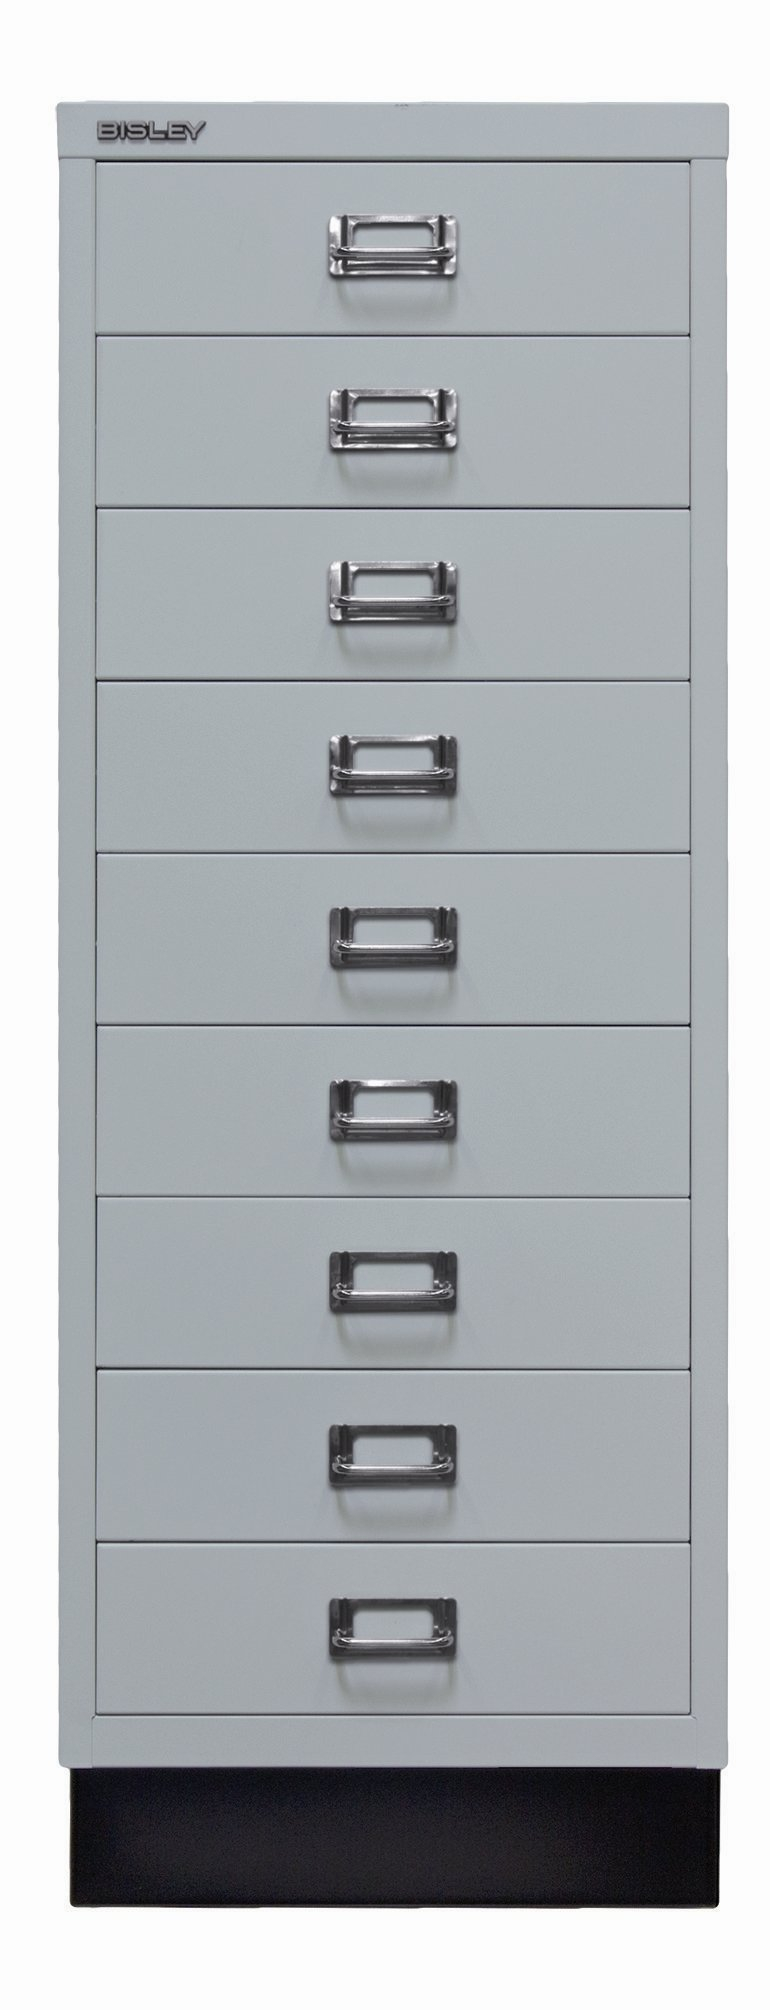 Bisley 39er 9 Drawer Filing Cabinet Wayfaircouk within proportions 770 X 2010